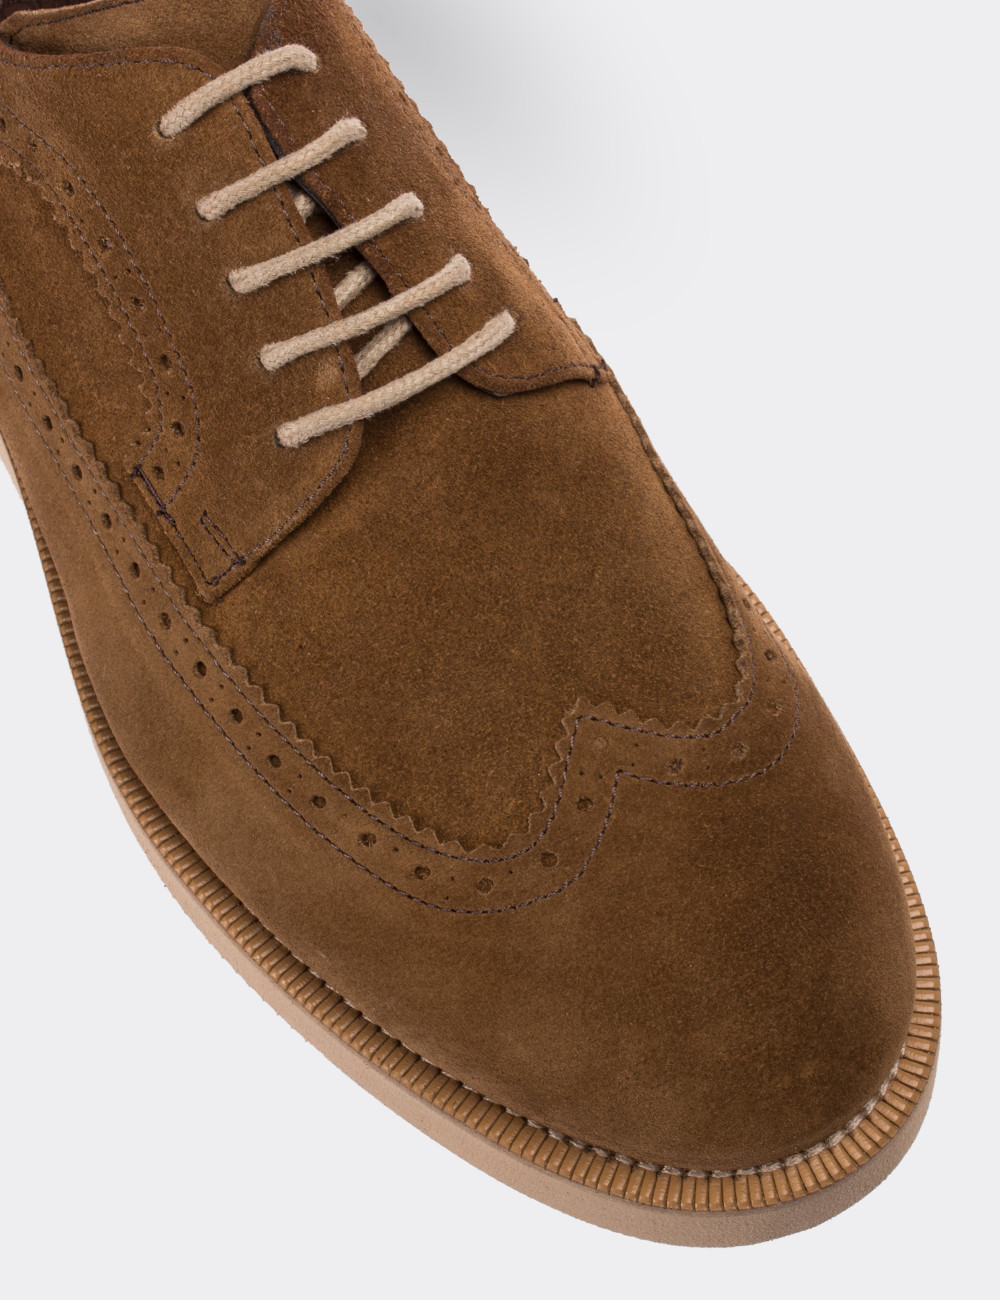 Brown Suede Leather Lace-up Shoes - 01293MKHVE22